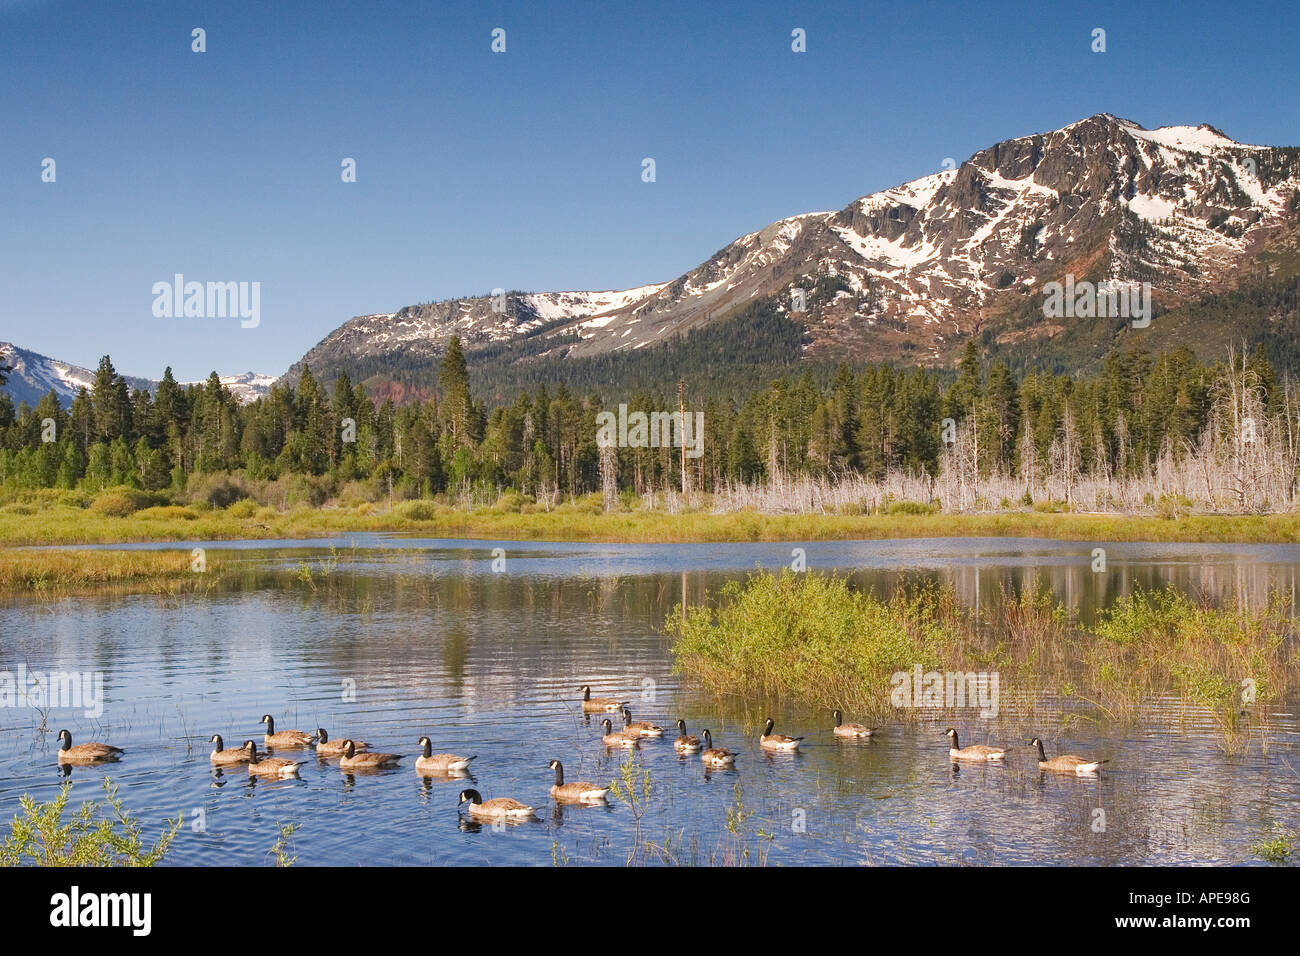 A flock of Canadian geese swimming in a pond in front of Mount Tallac near Lake Tahoe in California Stock Photo